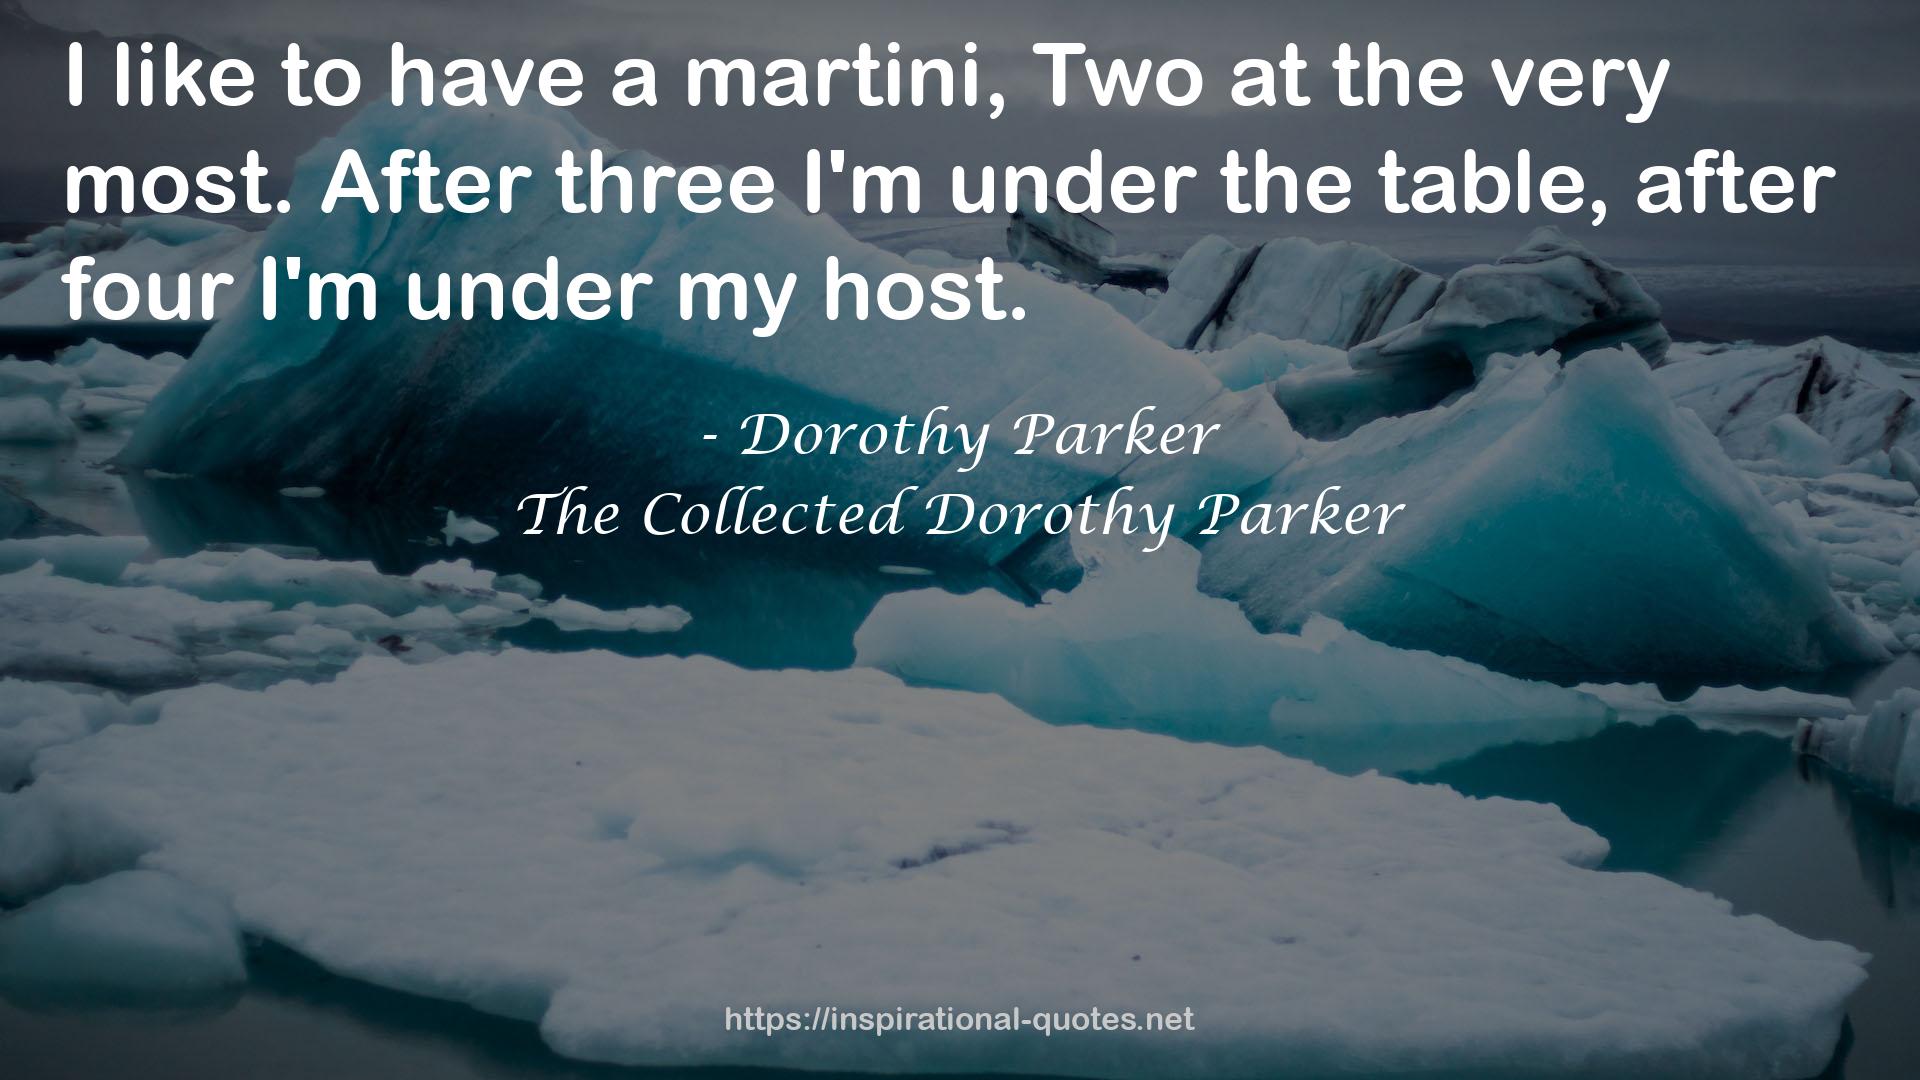 The Collected Dorothy Parker QUOTES